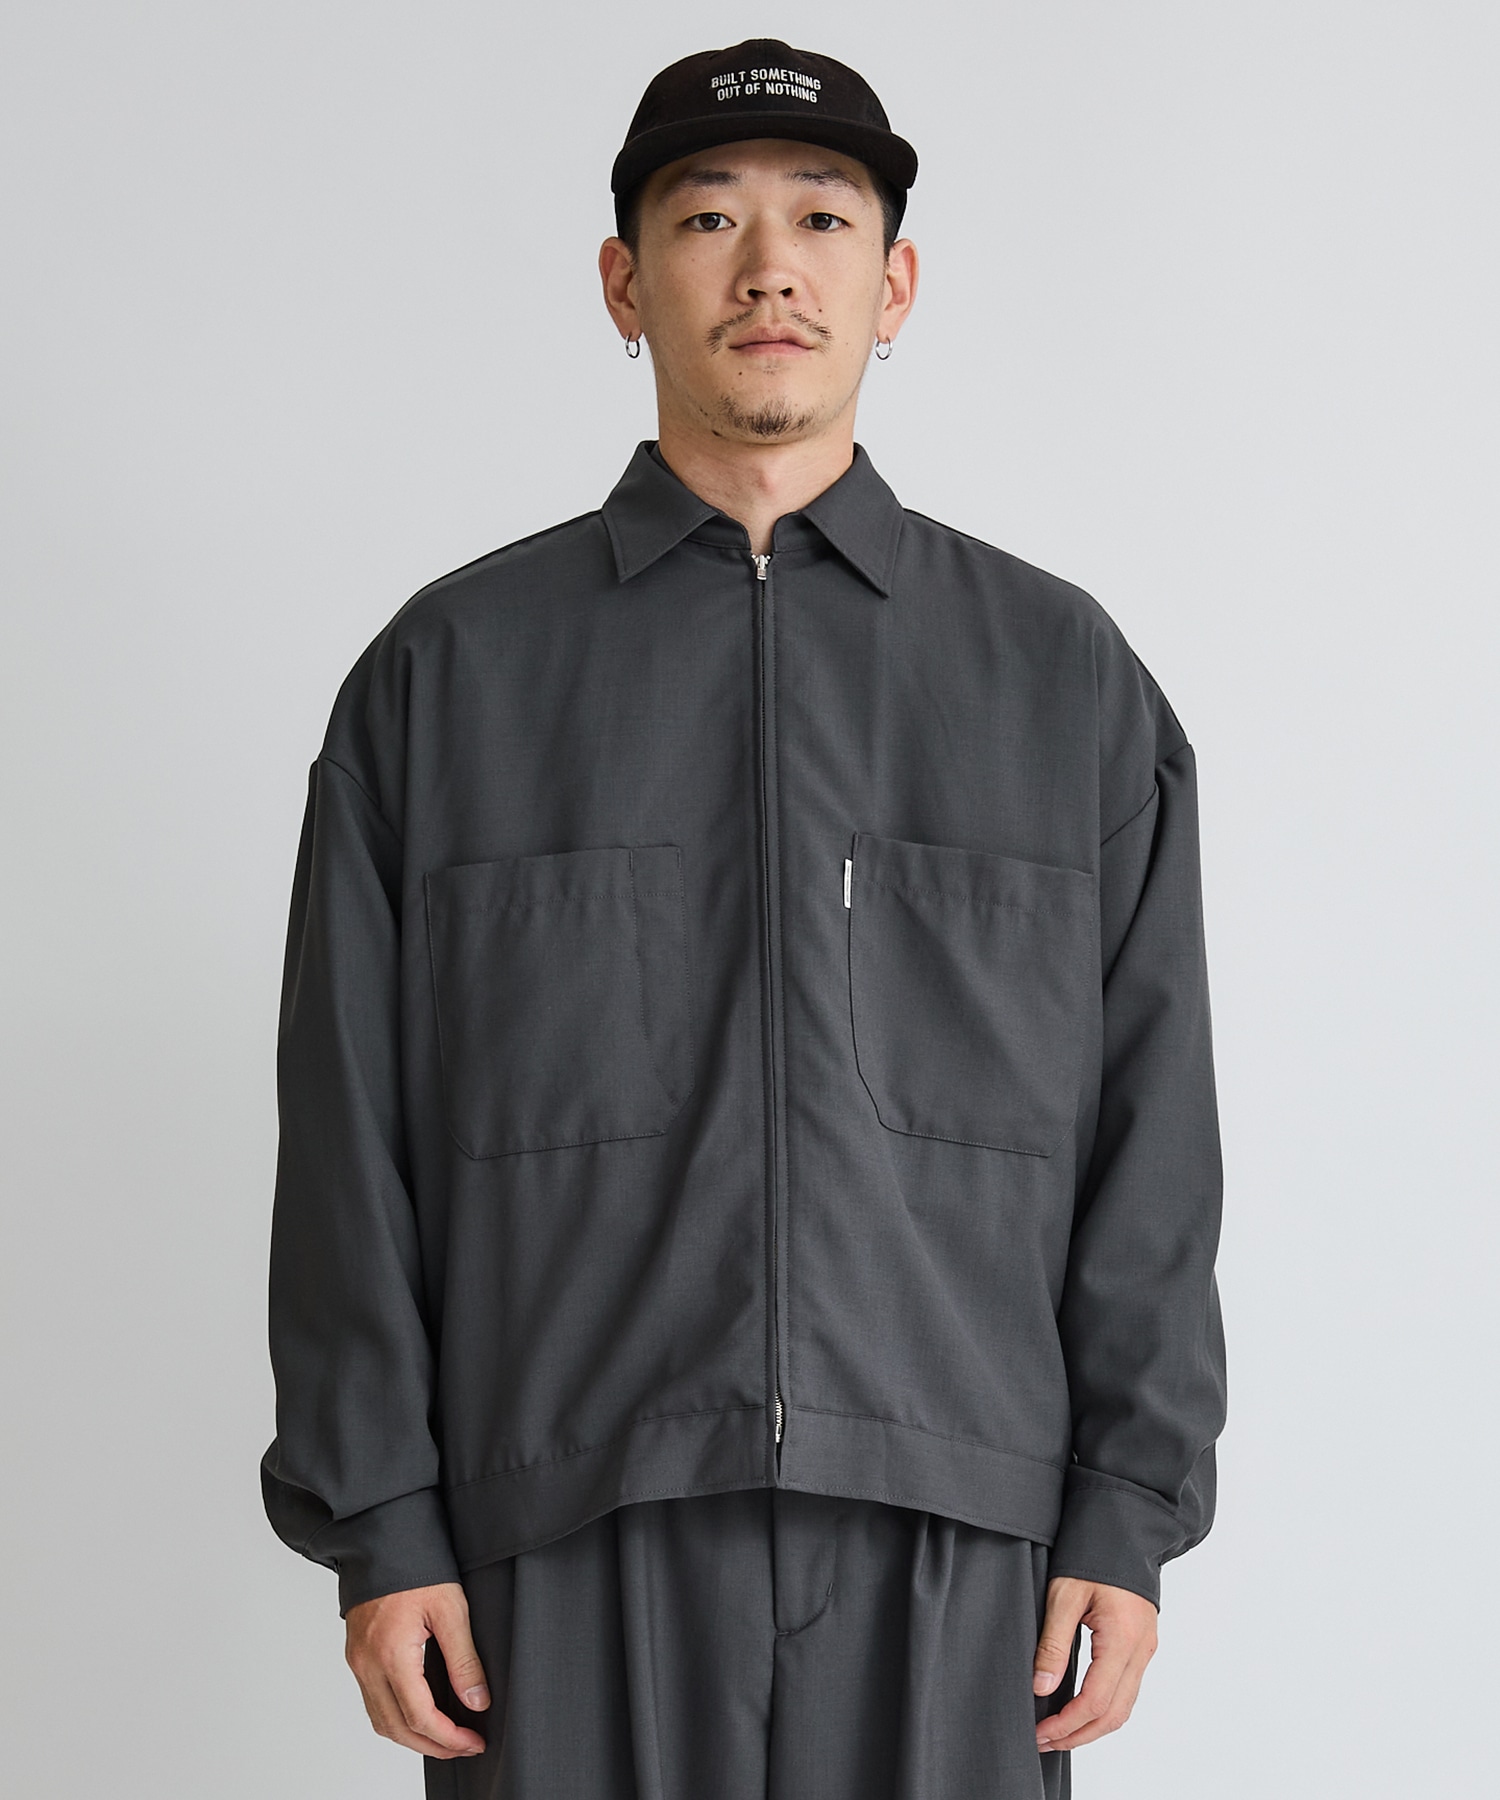 T/W Work Jacket | COOTIE PRODUCTIONS